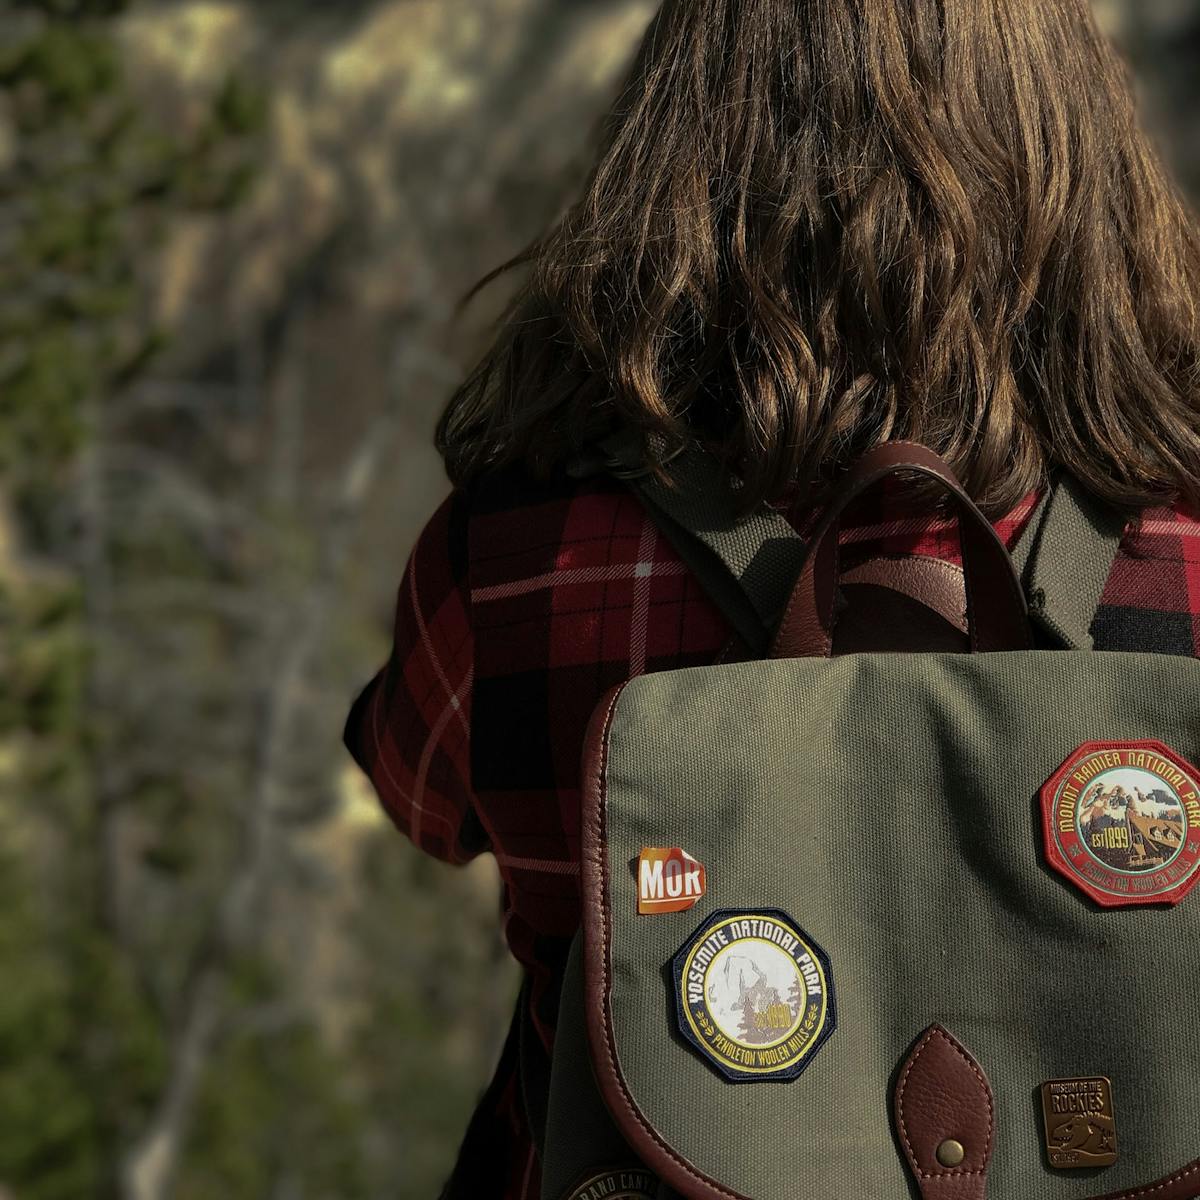  woman's outdoors backpack covered in fabric patches